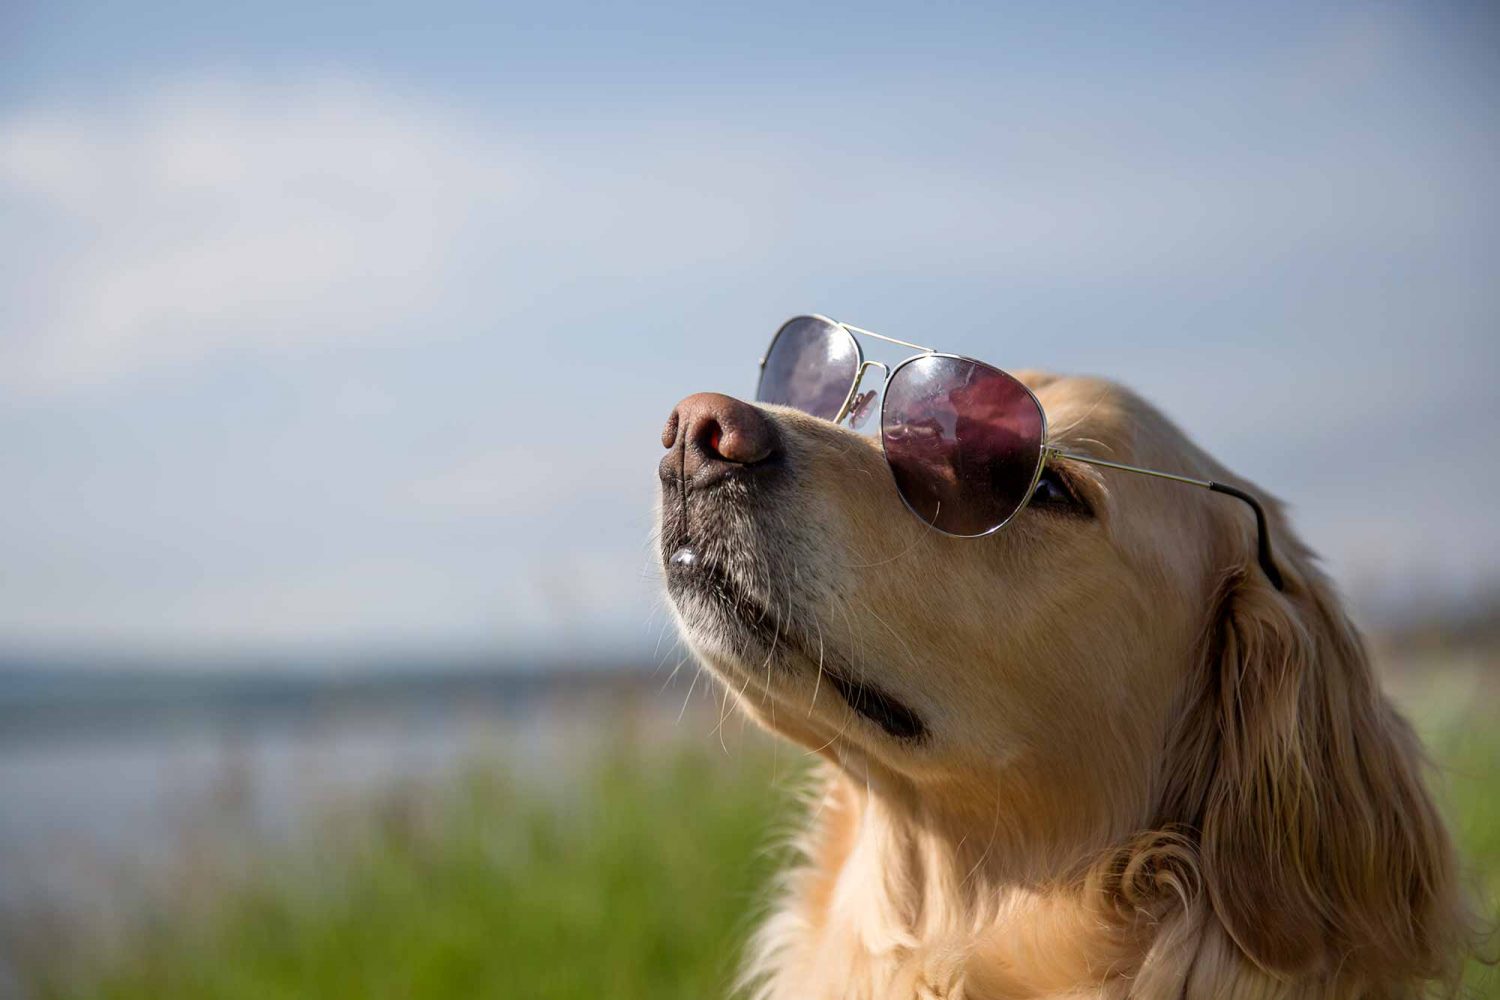 Giving pets shade and making sure pets have plenty of water to drink are important parts of summer pet safety